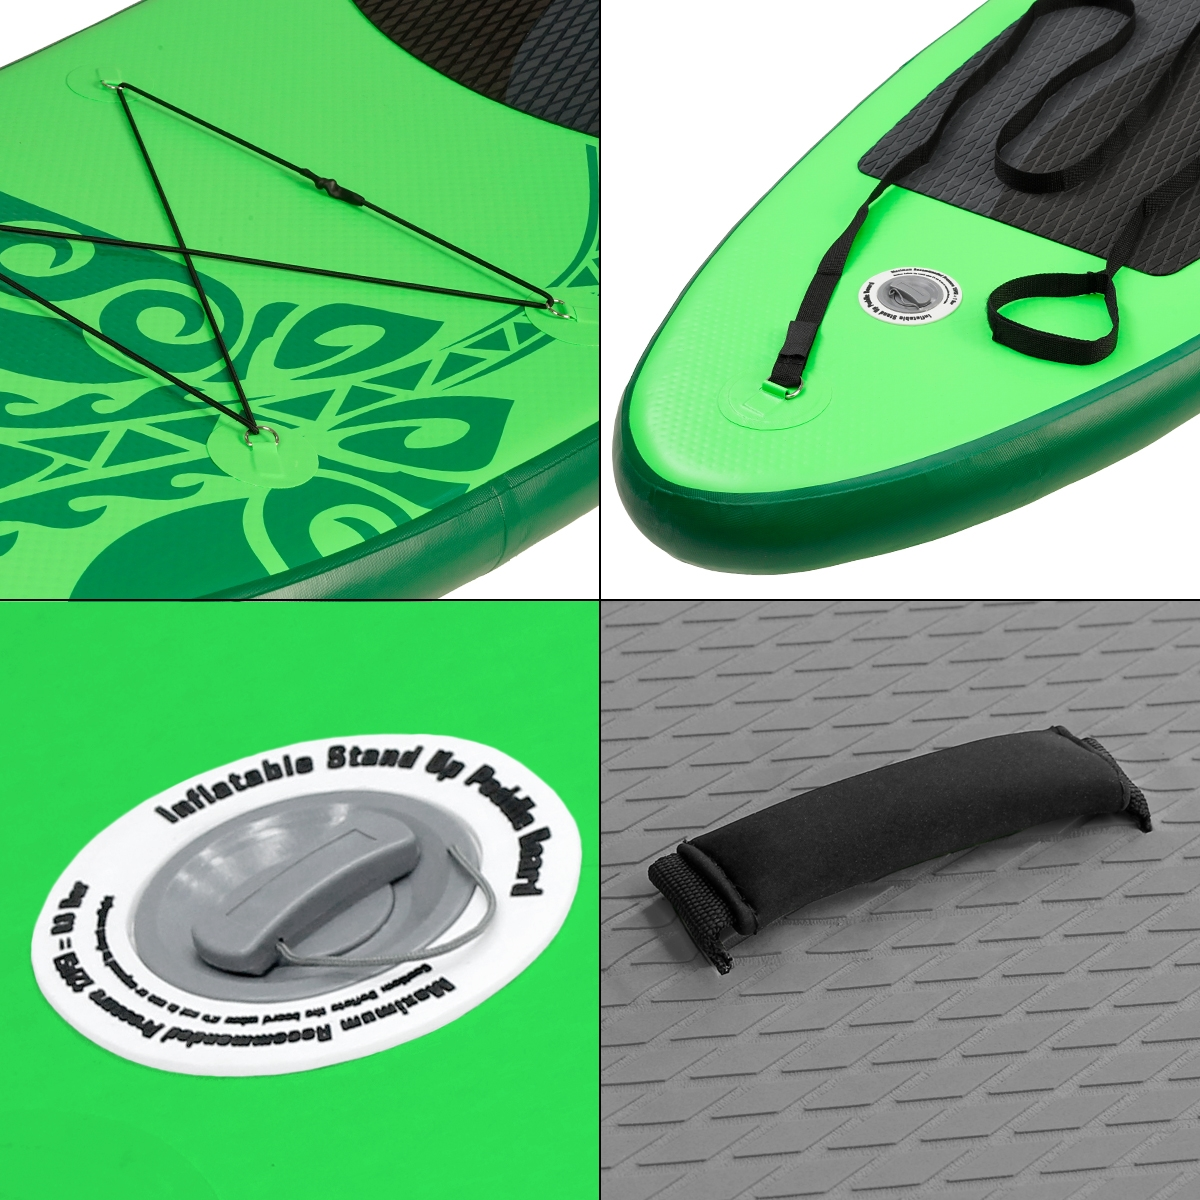 Up Up Stand Board Aufblasbares Stand Green Paddle Paddle, ECD-GERMANY